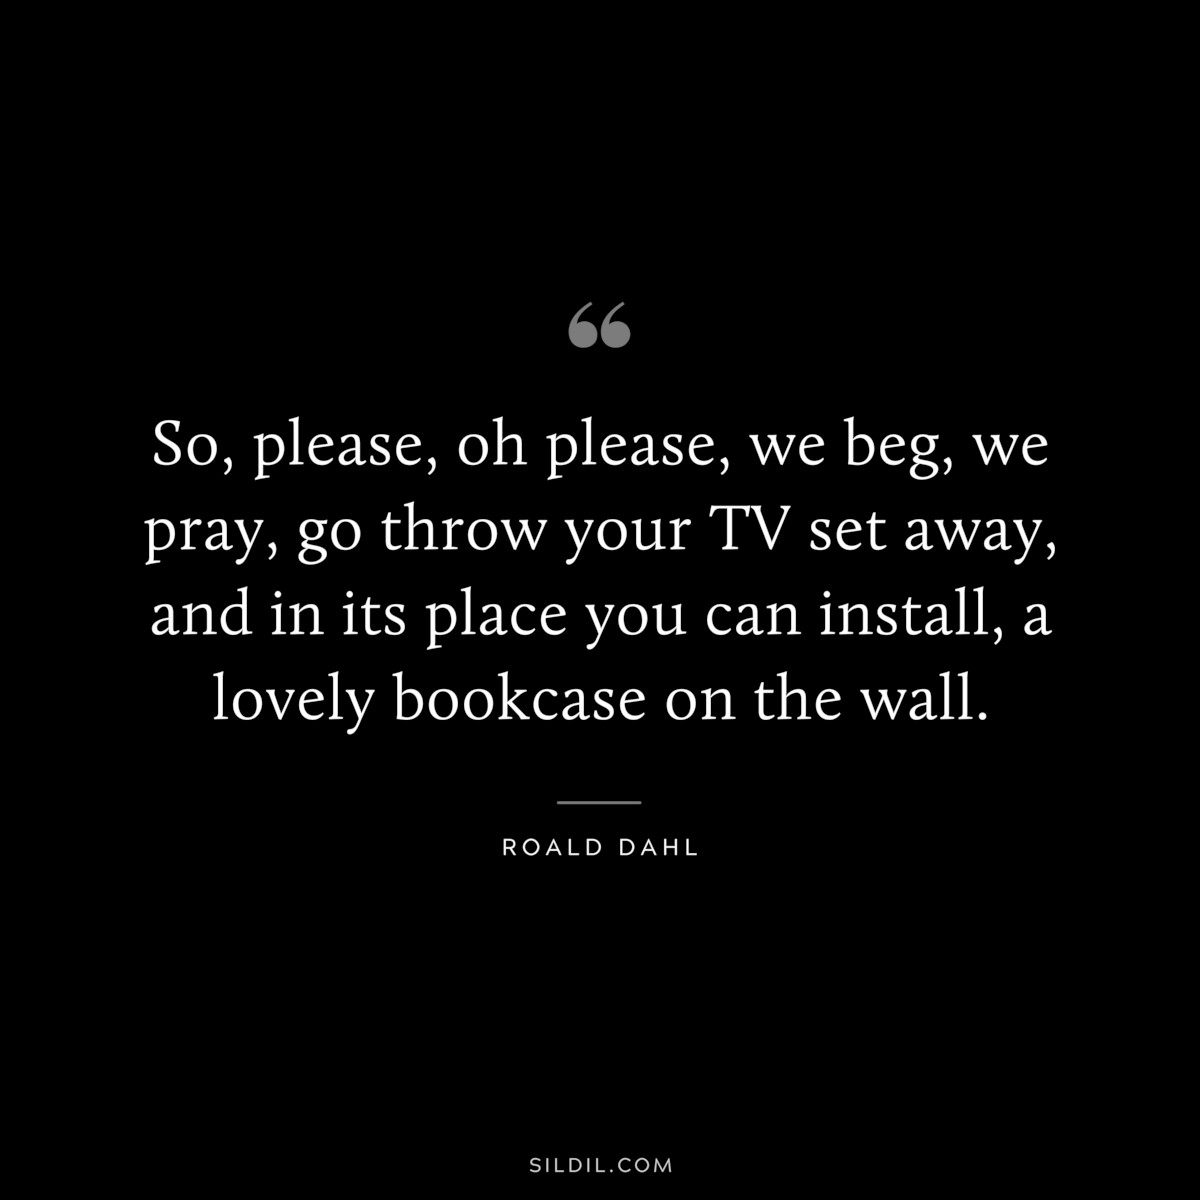 So, please, oh please, we beg, we pray, go throw your TV set away, and in its place you can install, a lovely bookcase on the wall. ― Roald Dahl